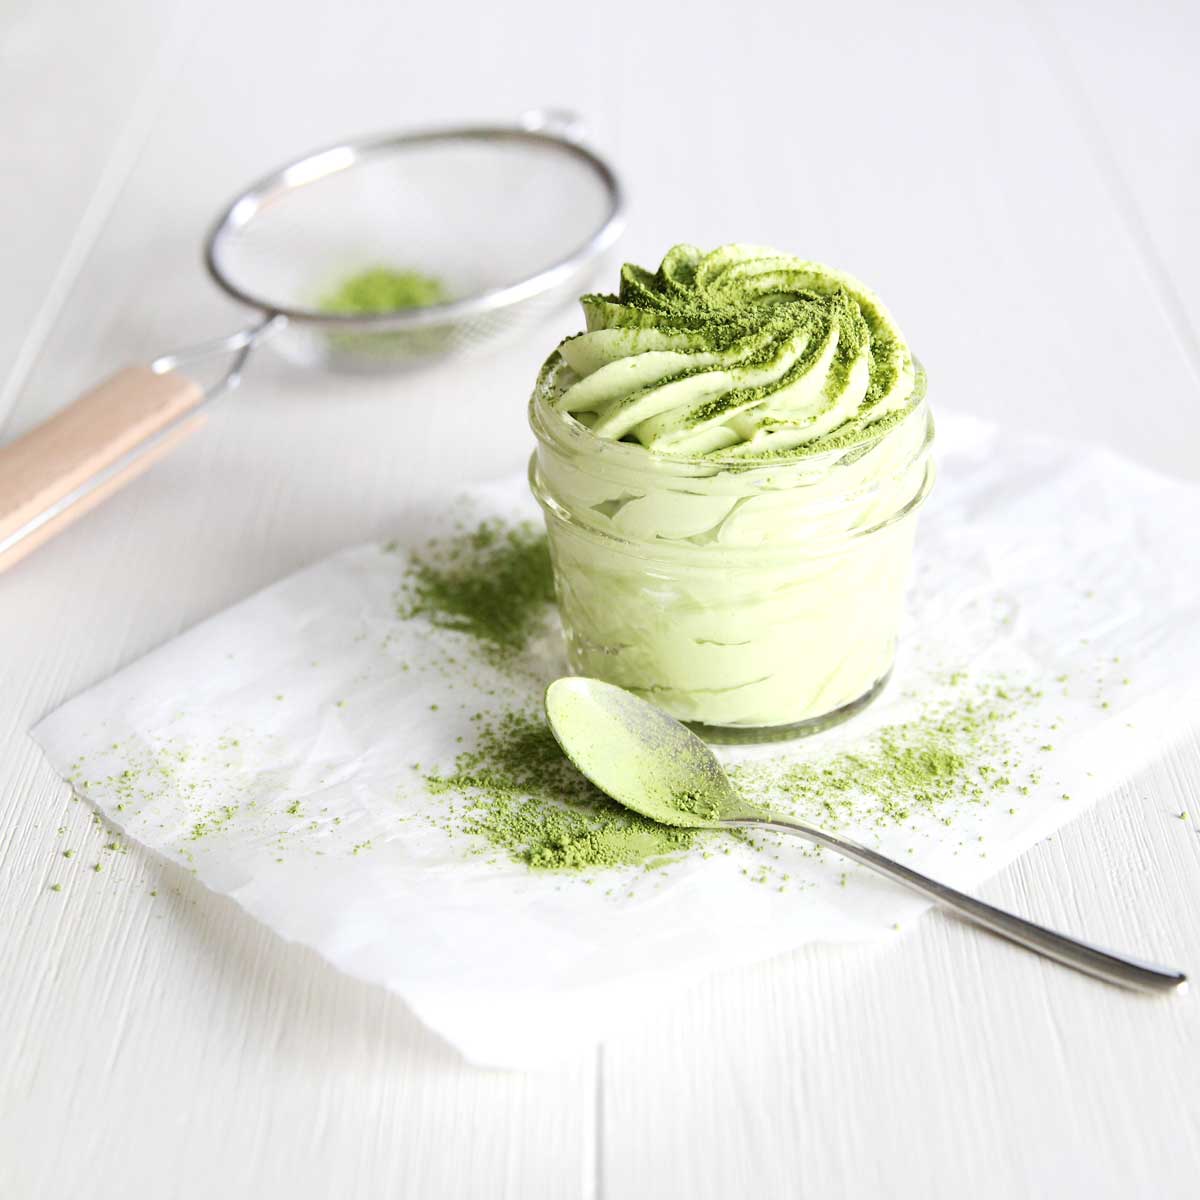 How to Make Sweet Matcha Whipped Cream (with a Sugar Free Option) - Matcha Scones